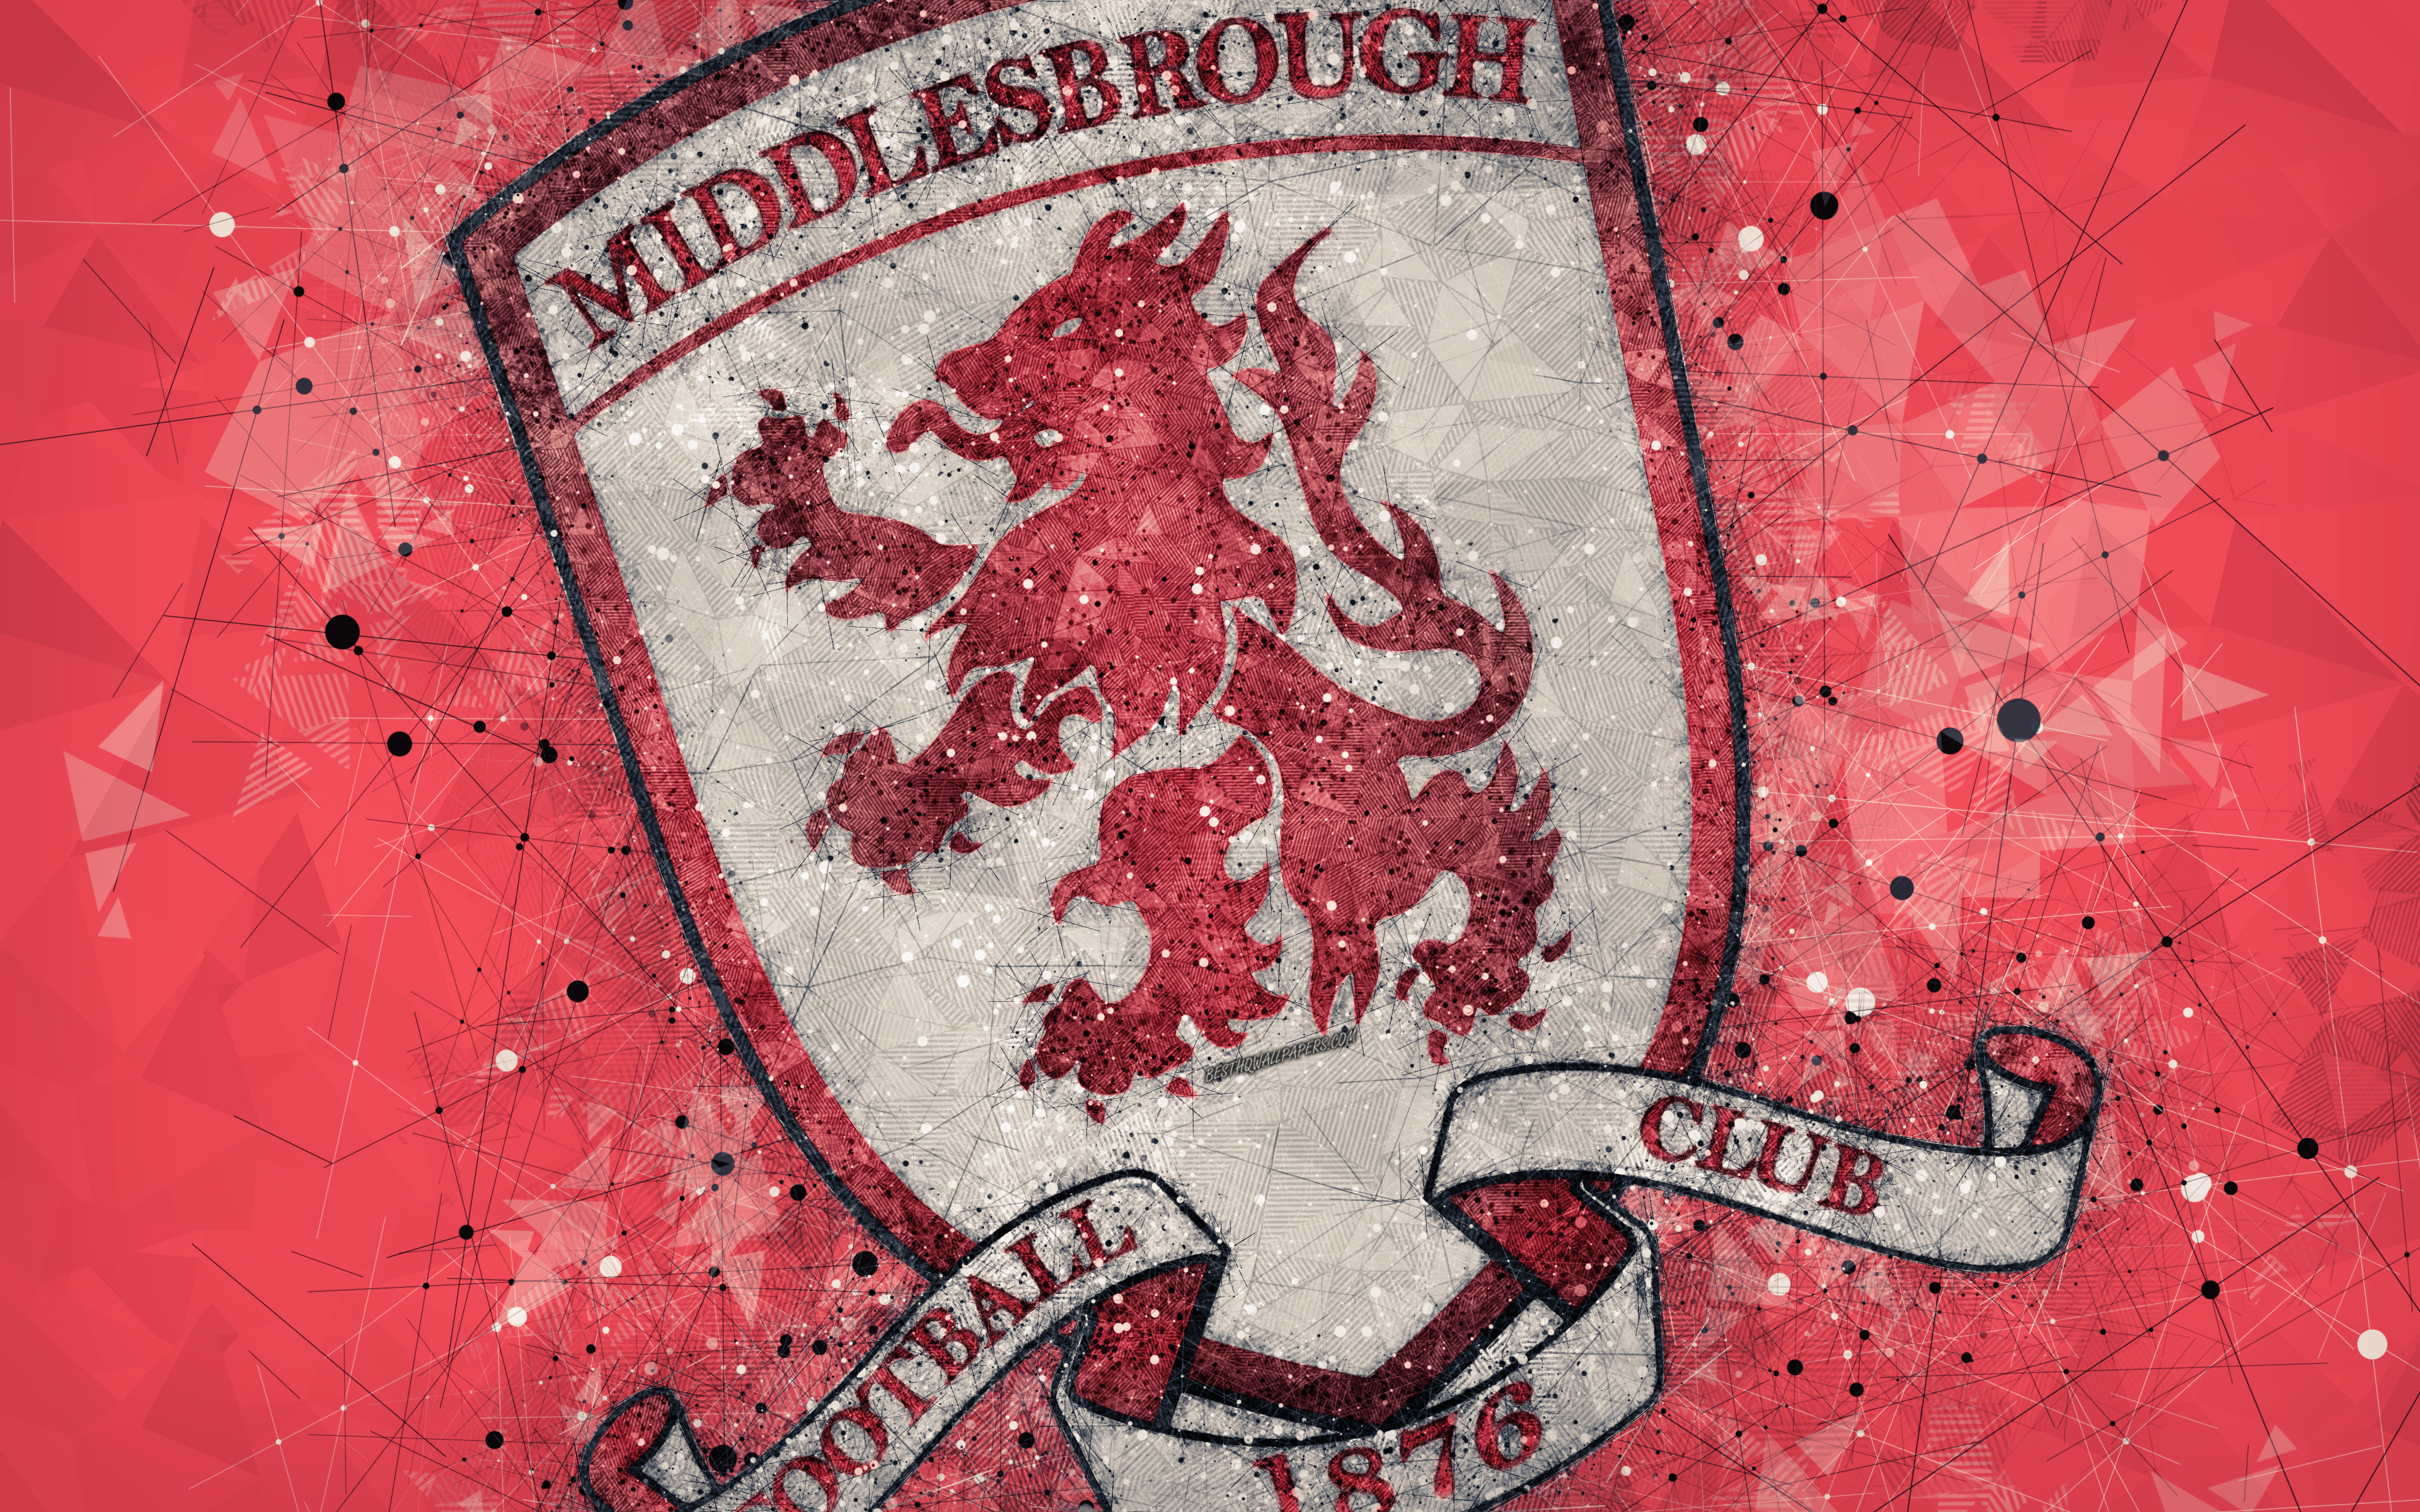 Download wallpaper Middlesbrough FC, 4k, geometric art, logo, red abstract background, English football club, emblem, EFL Championship, Middlesbrough, England, United Kingdom, football, English Championship for desktop with resolution 3840x2400. High